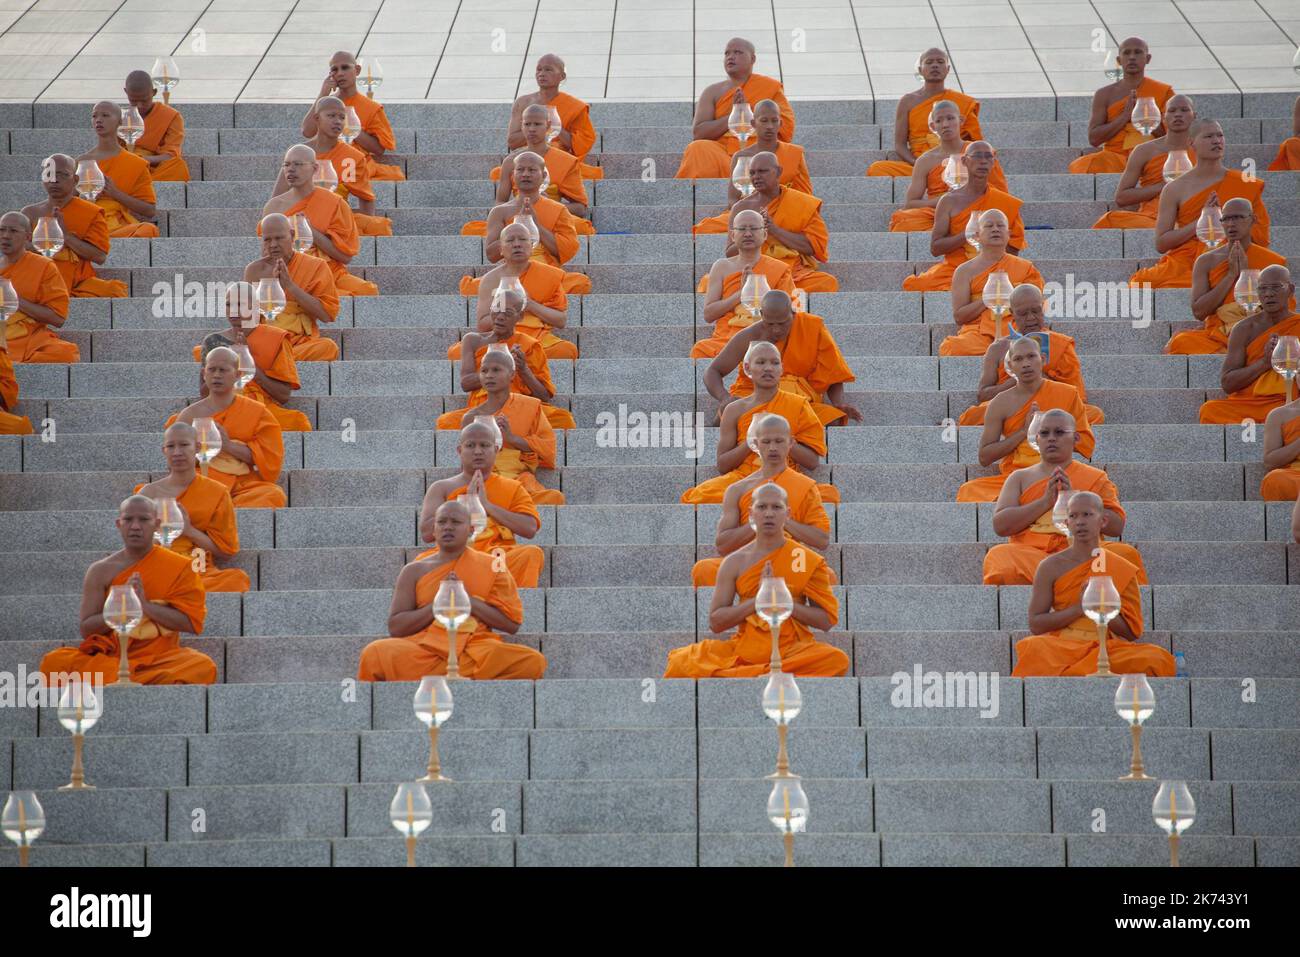 Buddhist monks pray during a yearly ceremony at Wat Phra Dhammakaya Temple in the north of Bangkok, Thailand on February 11, 2017. Thai people celebrate the buddhist festival of clockwise circumambulation and Makha pratipa lantern lighting ceremony at Dhammakaya Temple on 'Makha Bucha Day' during the third lunar moon, where around 1250 monks gathered to be ordained by the Buddha.   Stock Photo